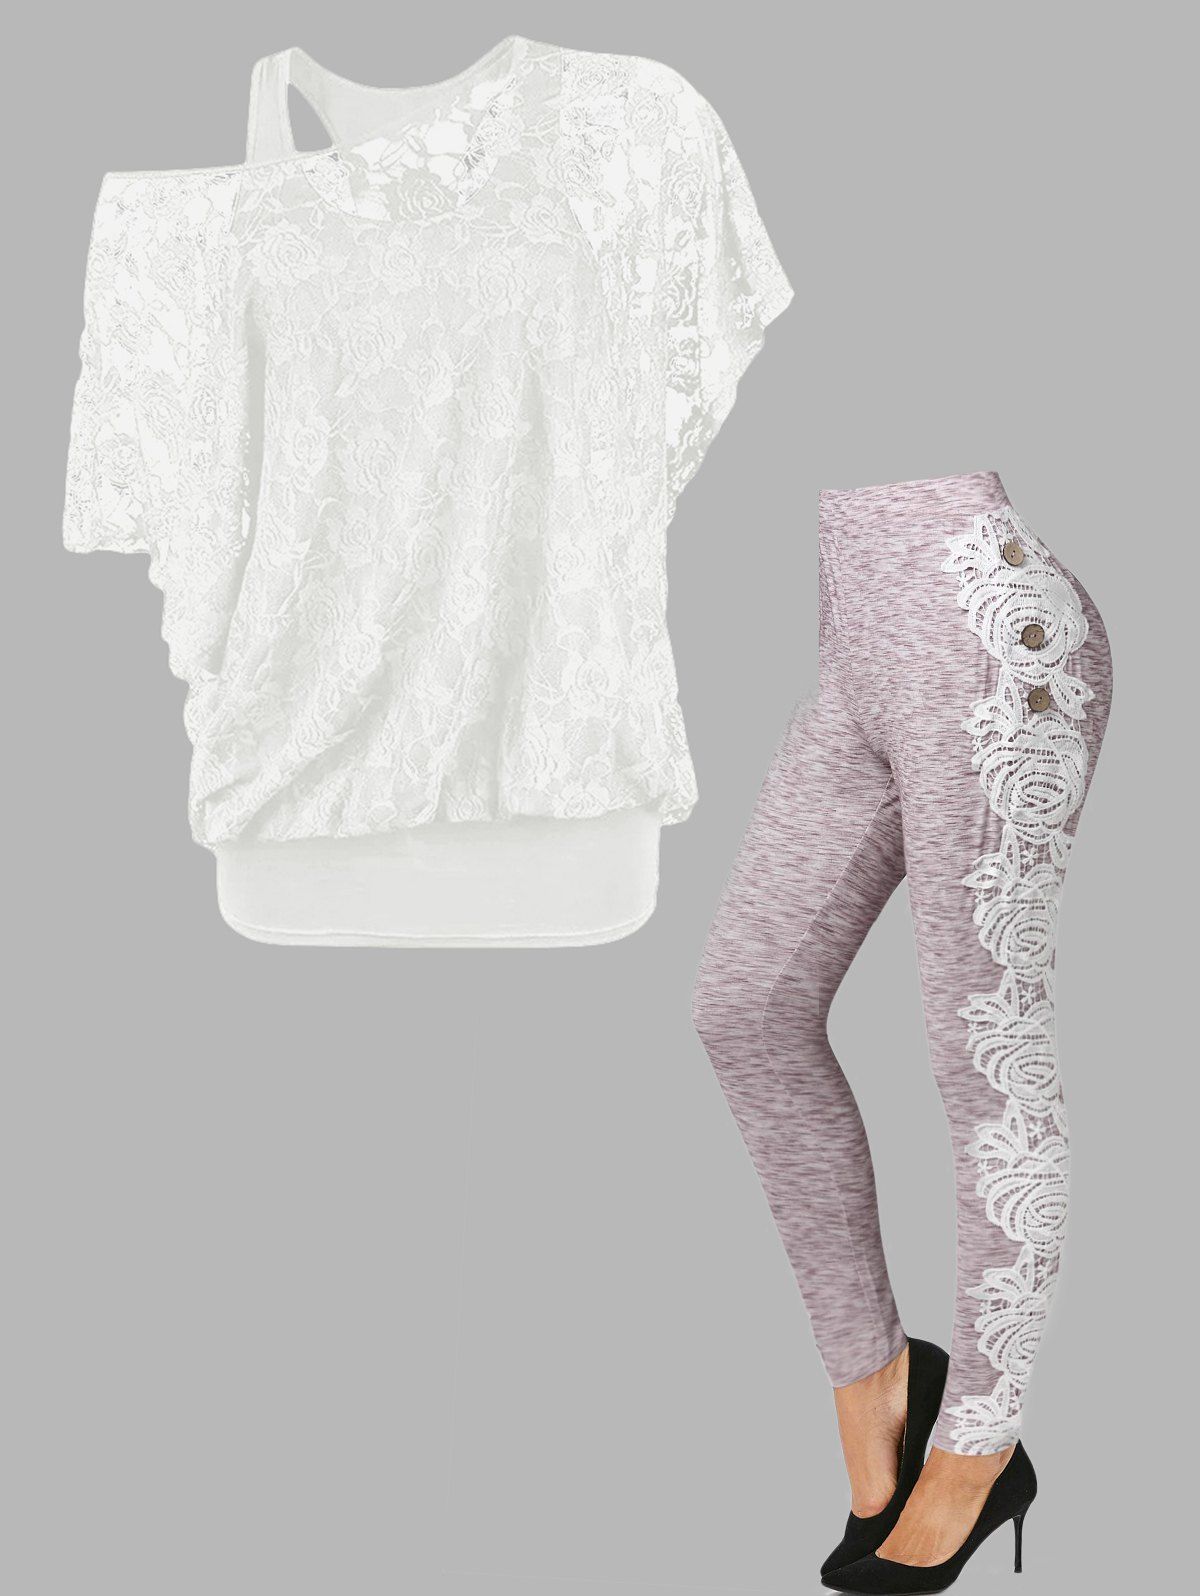 Sheer Rose Lace Bat Sleeve Skew Neck T Shirt Basic Cami Top And Lace Applique Space Dye Leggings Outfit - multicolor S